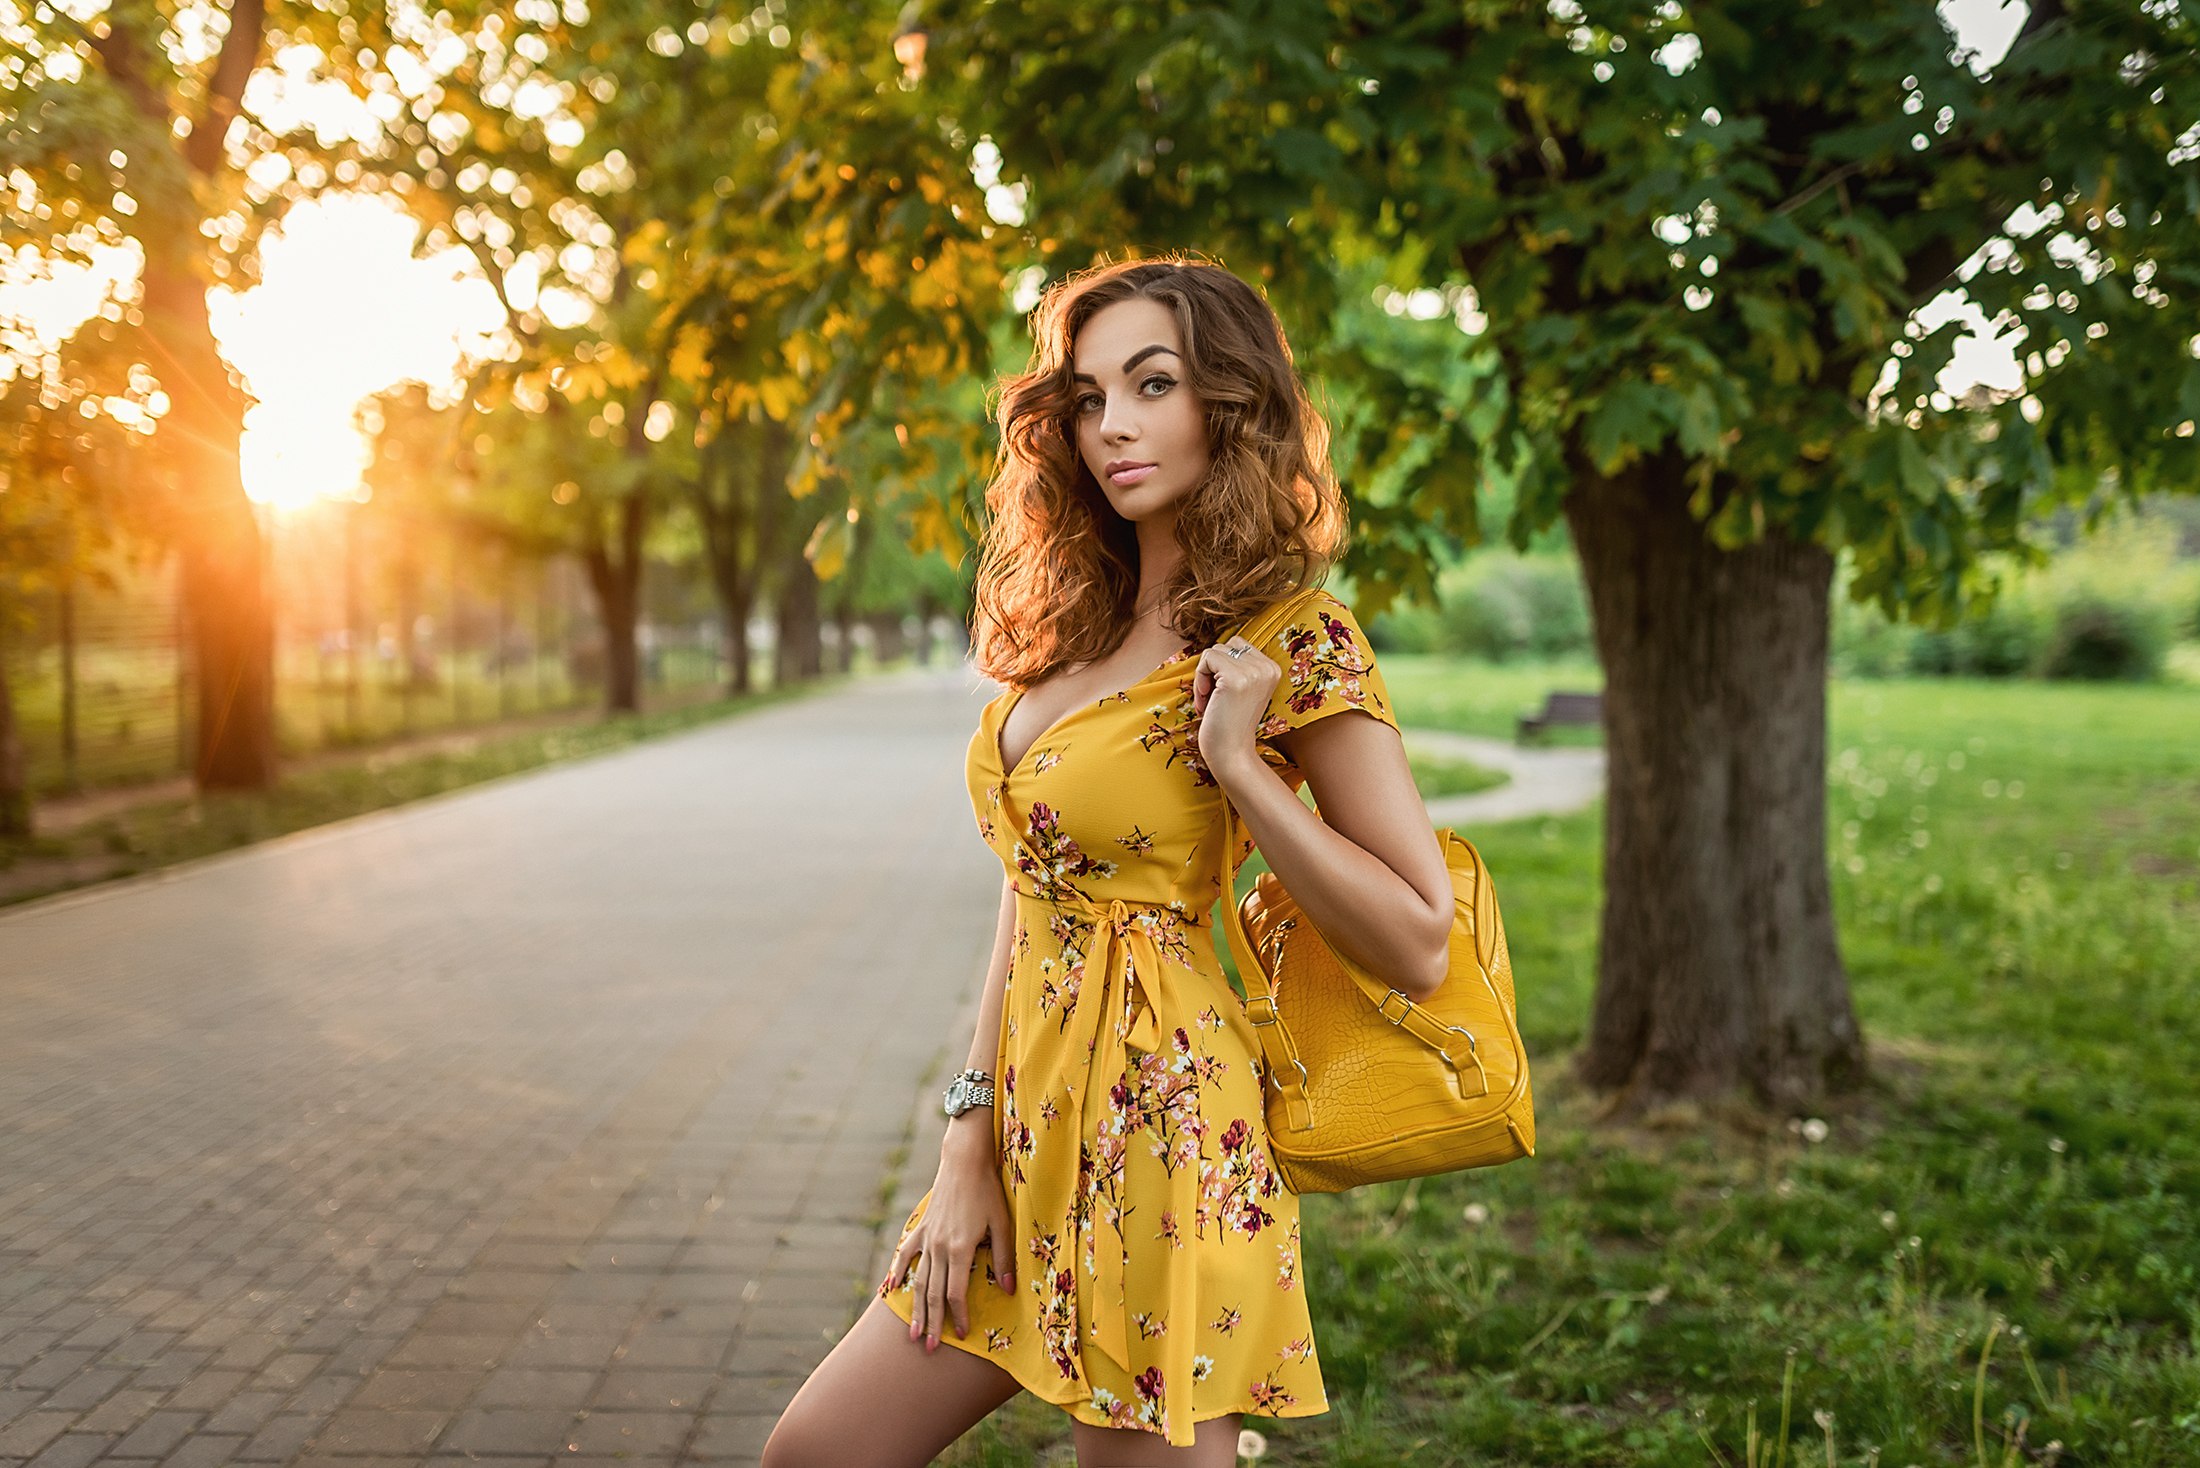 Yellow Dress Girl Outdoors, HD Girls, 4k Wallpapers, Images ...